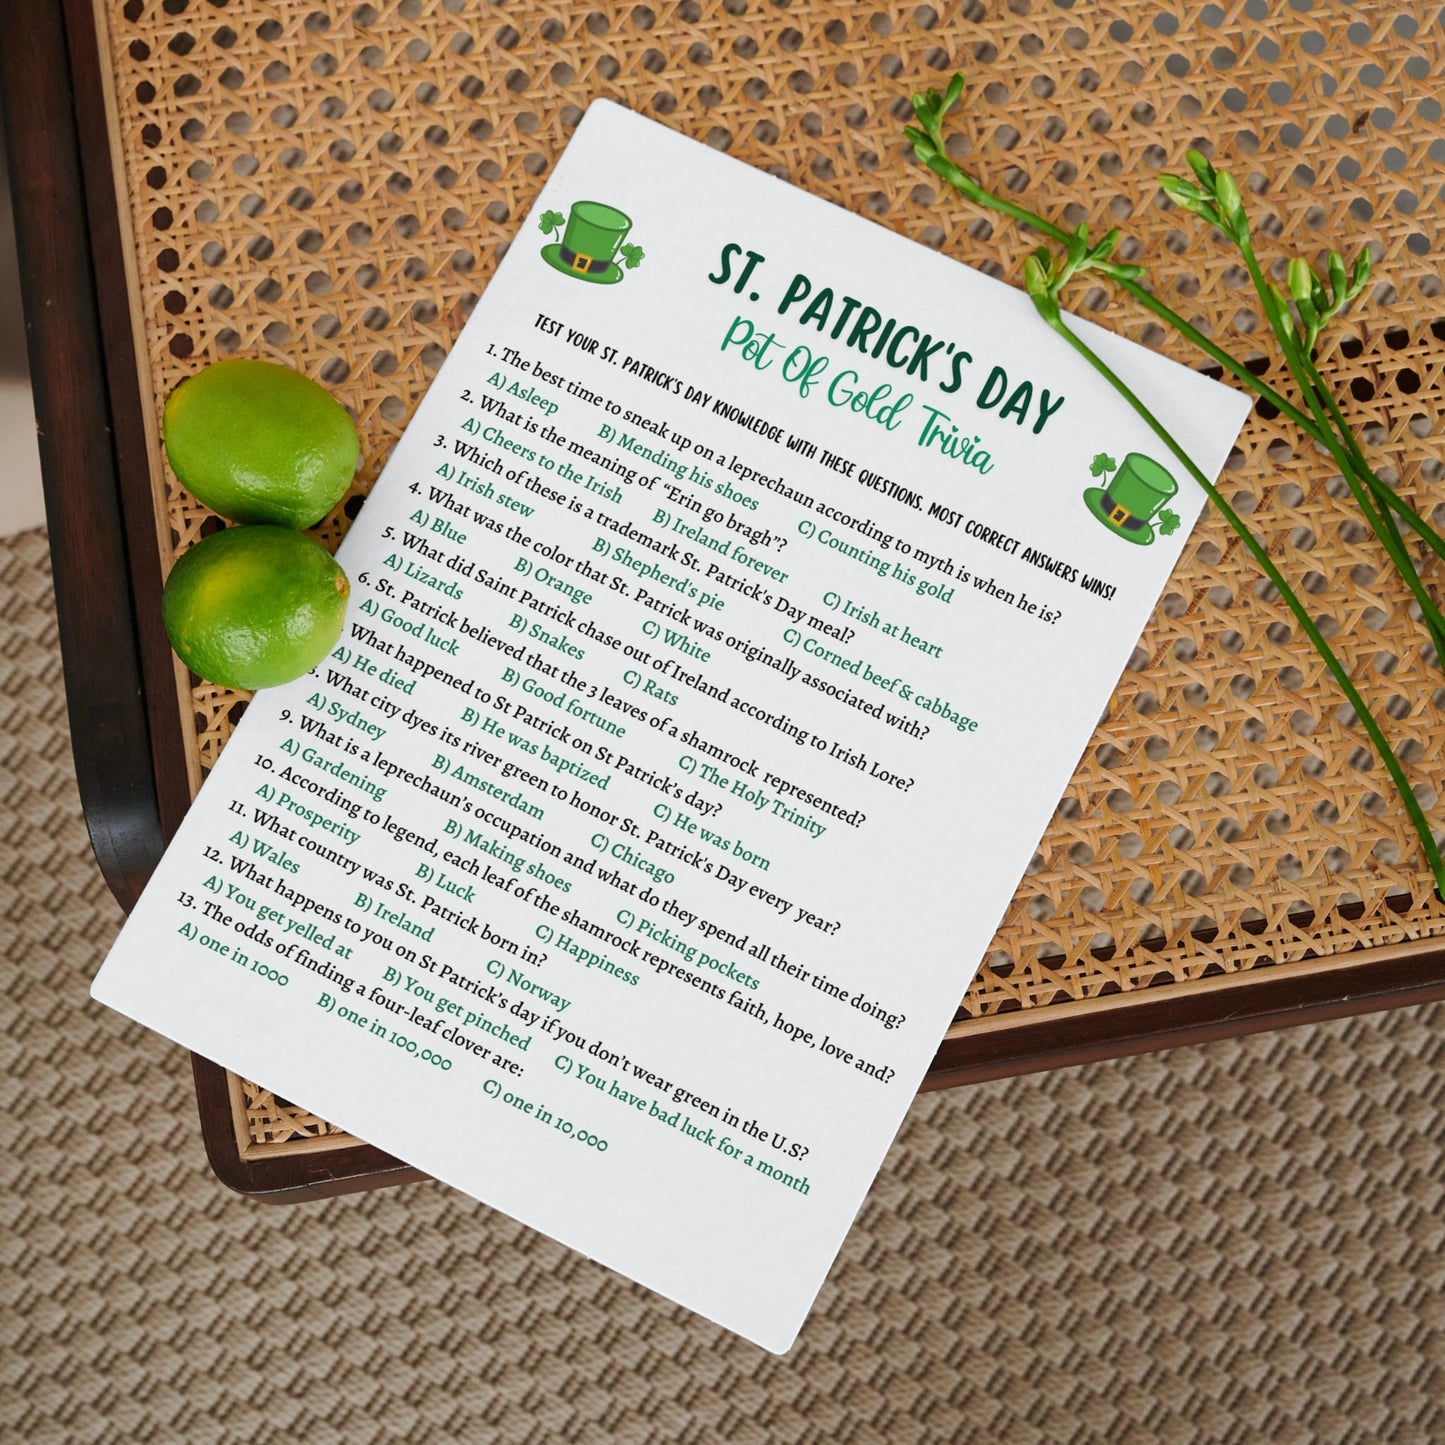 St Patrick's Day Trivia Game Printable, St Patricks Day Games, St Paddys Day Party Game, St Pattys Day Adult Trivia Game, Classroom Games